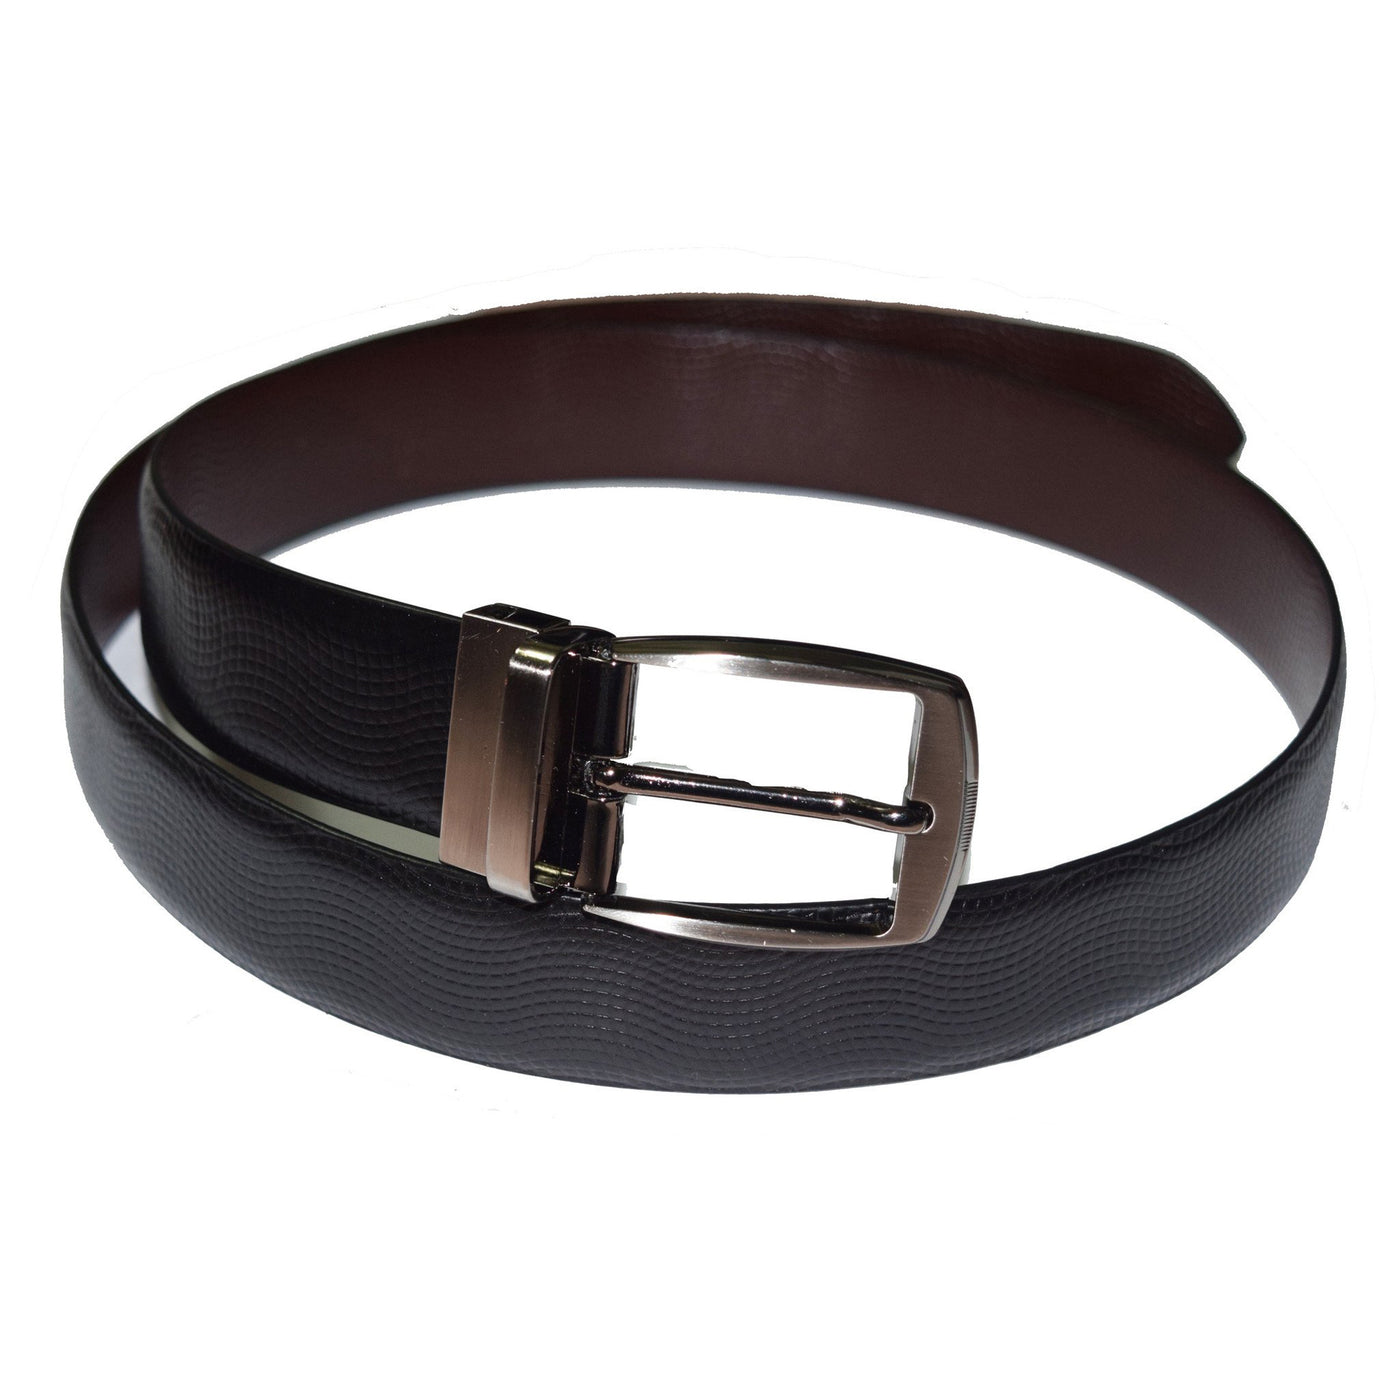 High-quality wave print Brown and black reversible leather belt